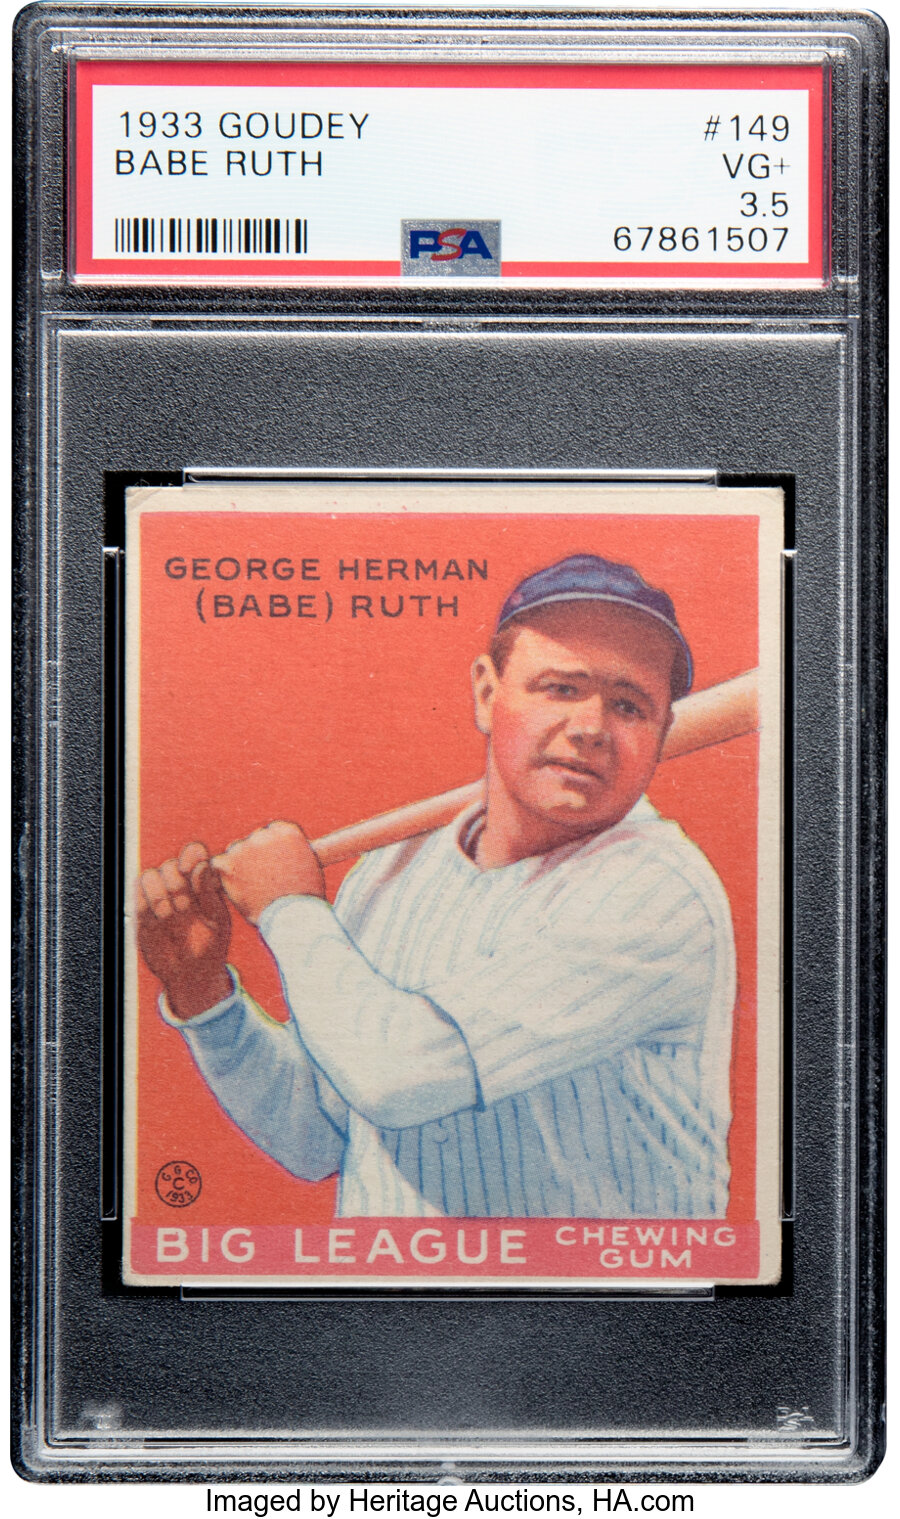 1933 Goudey Babe Ruth #149 PSA VG+ 3.5 - New to the Hobby!